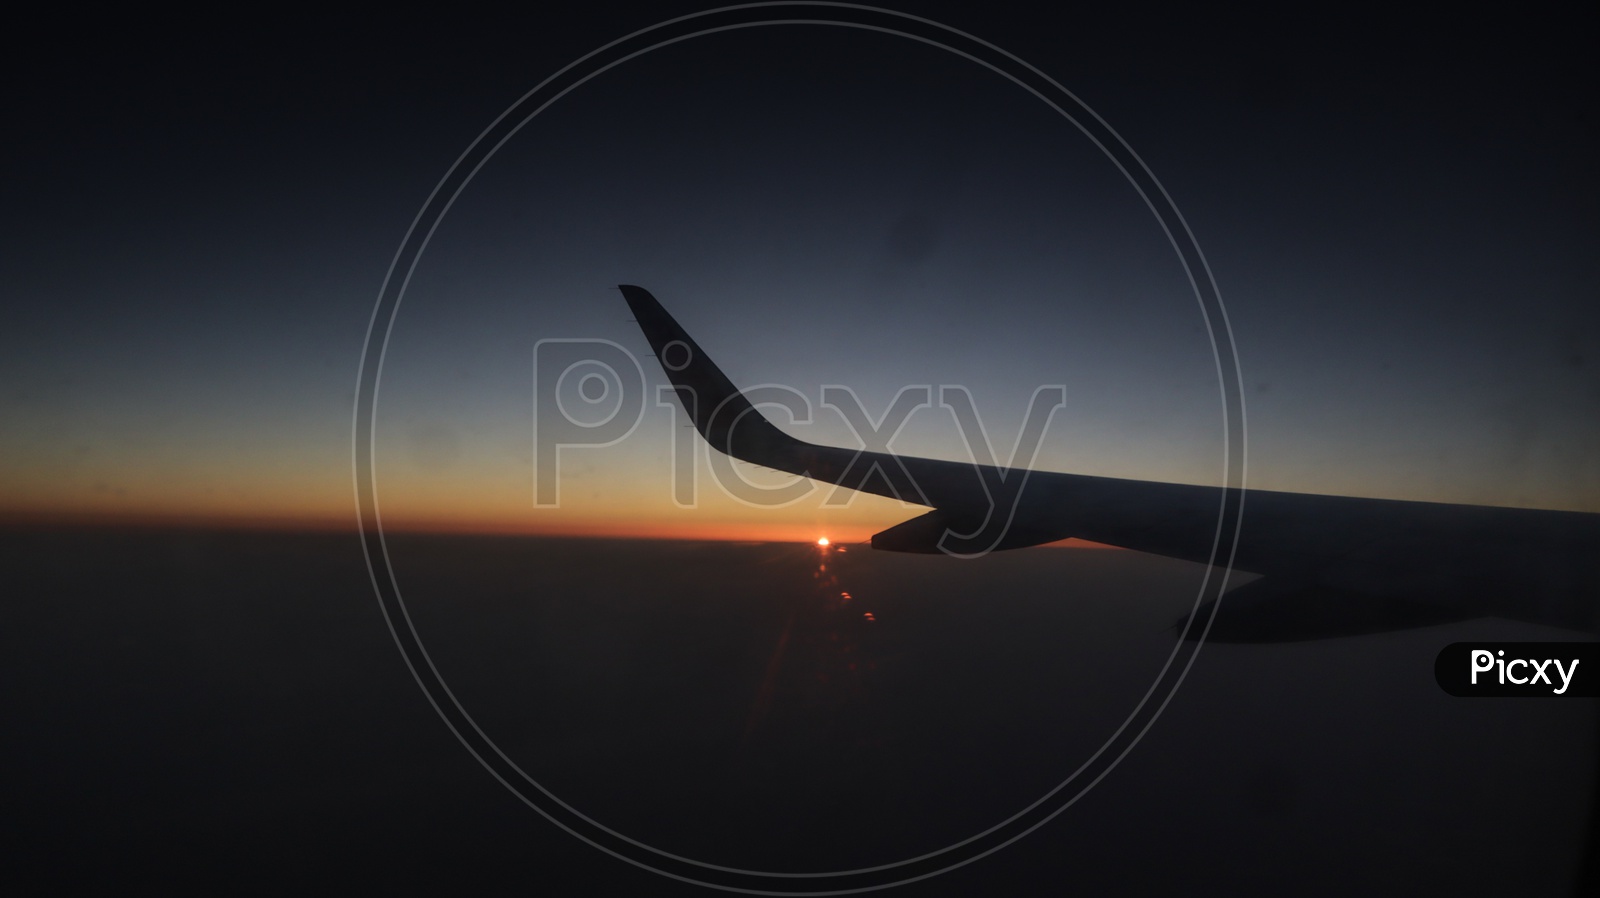 Silhouette Of a Flight Wing Over a bright Sun In Sky